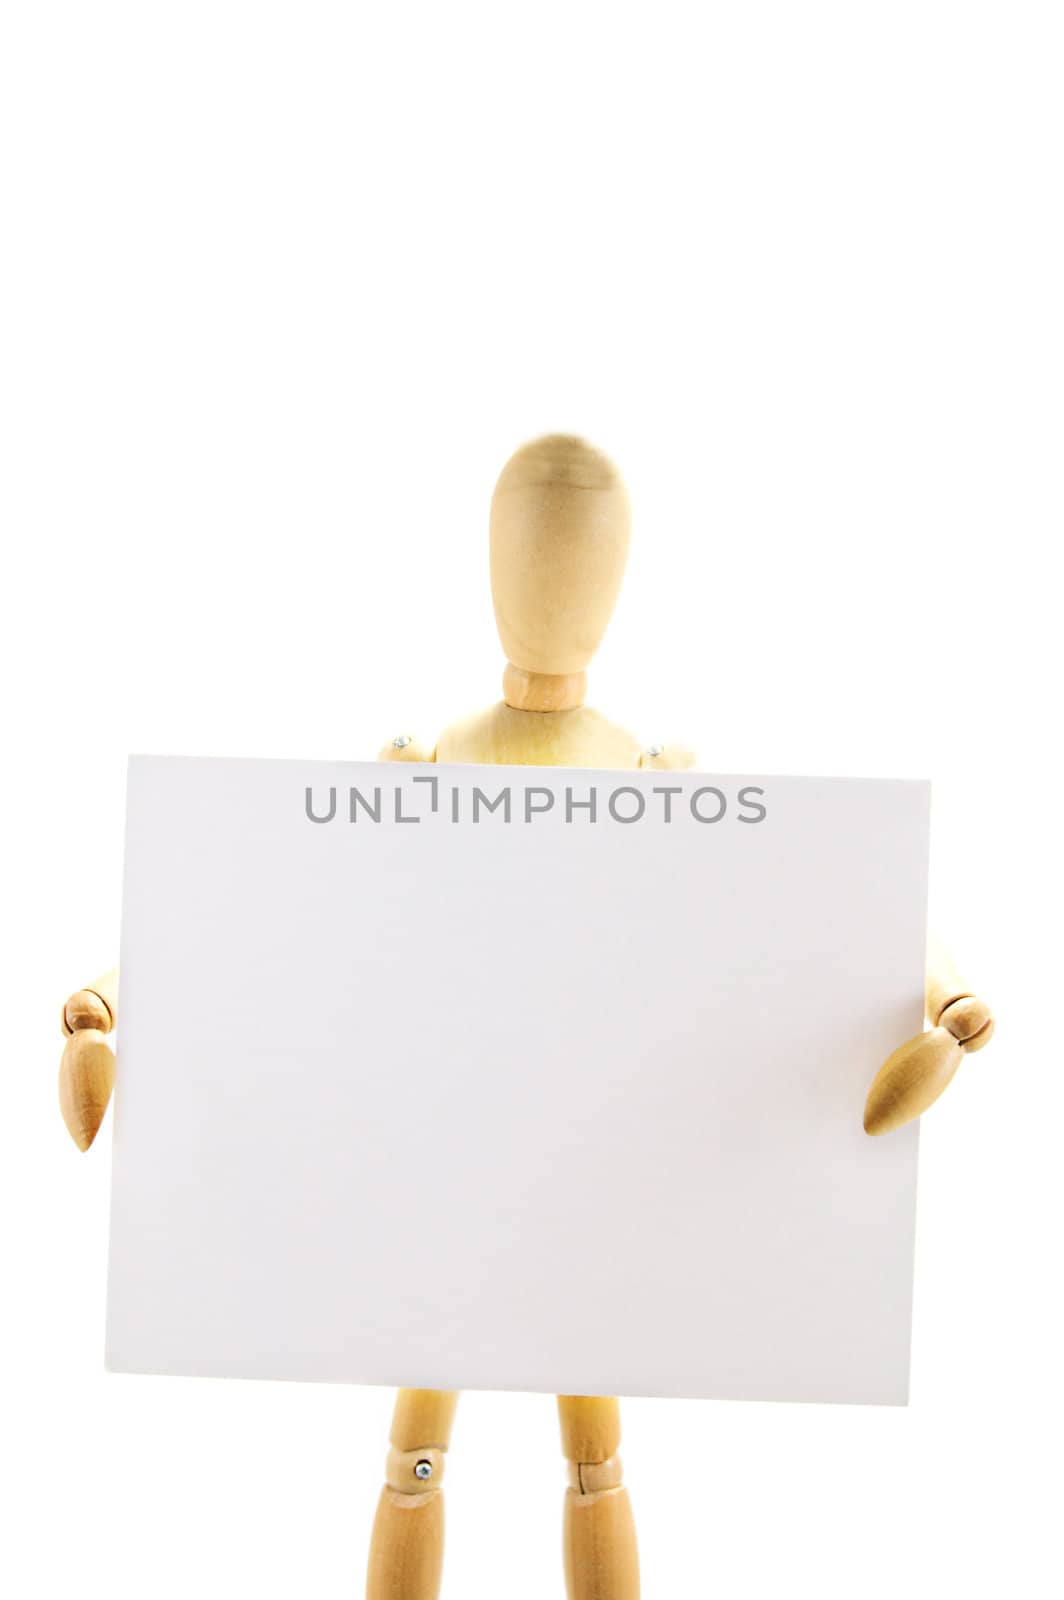 Wooden mannequin holding blank note on white background